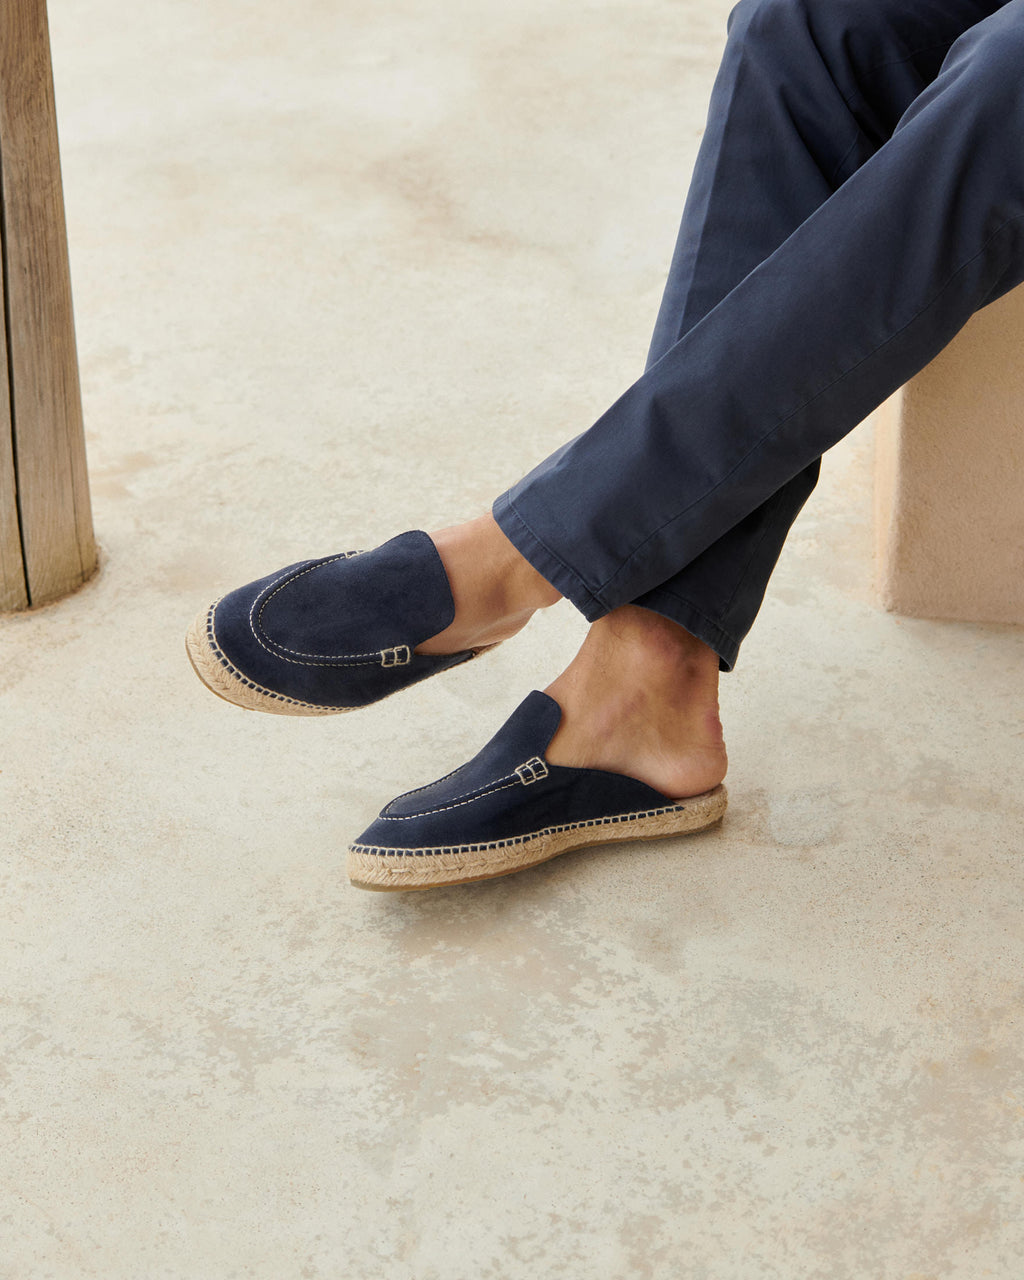 Traveler Loafers Mules - Patriot Blue